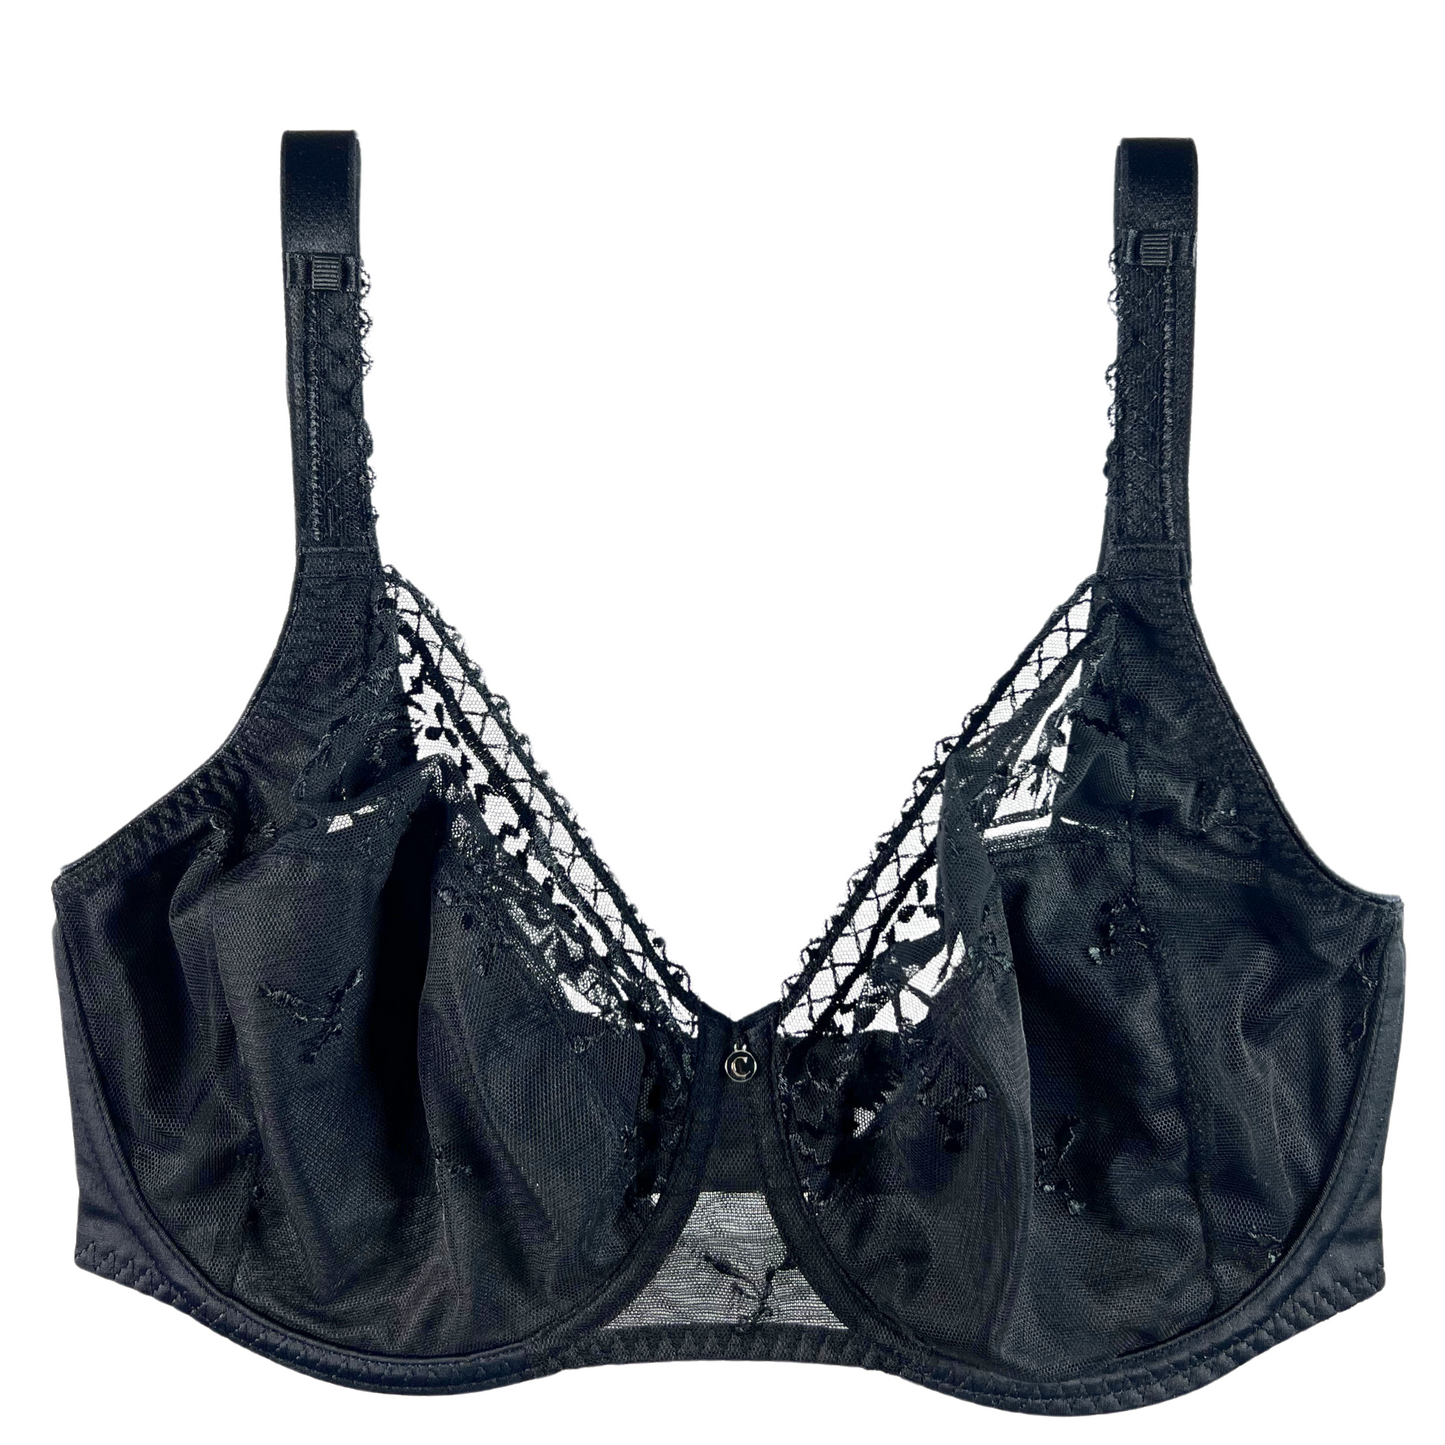 Chantelle Every Curve Full Coverage Unlined Bra - Black